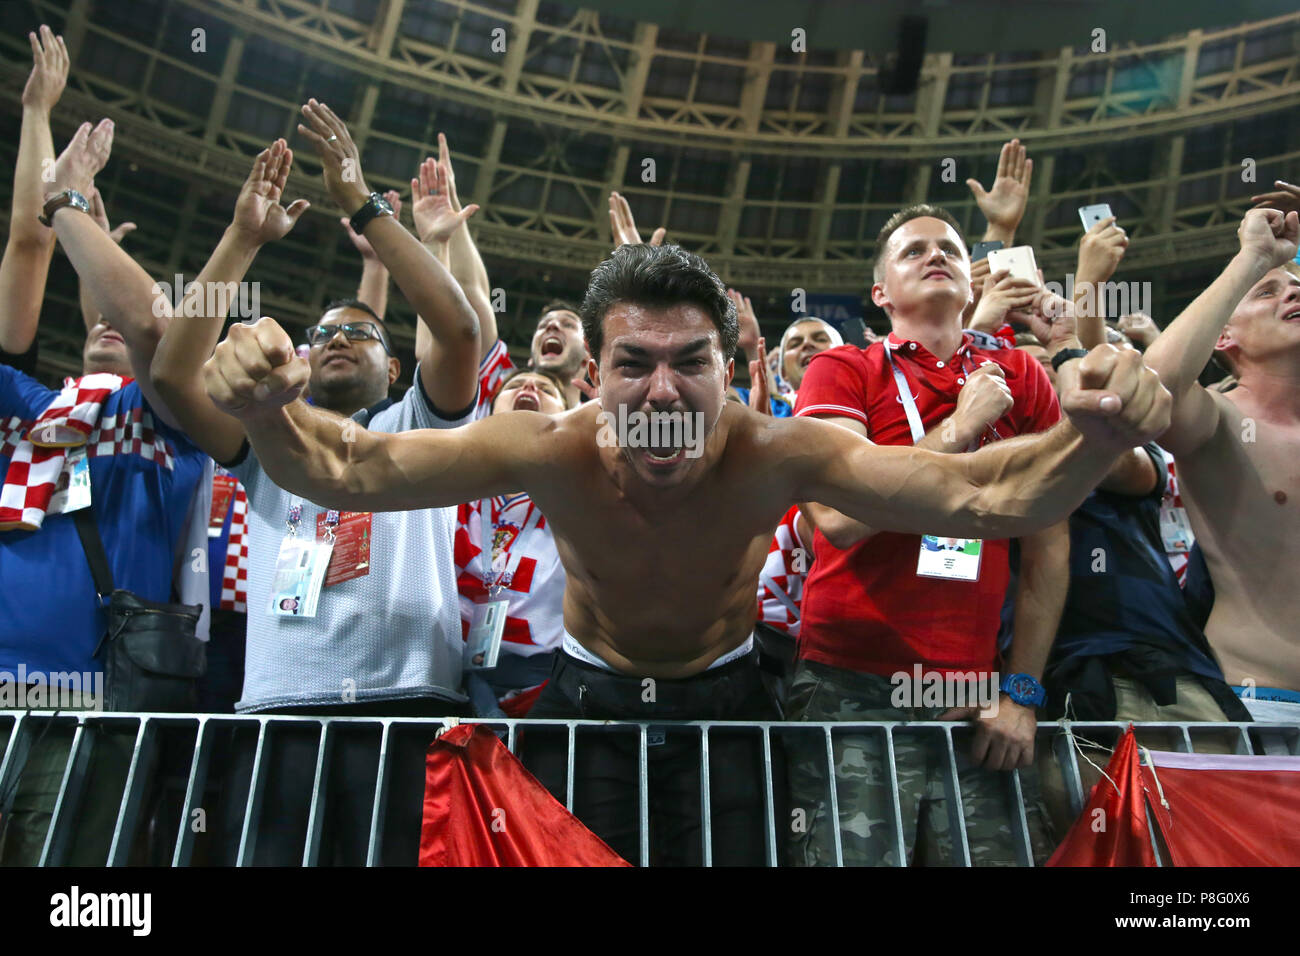 during the FIFA World Cup, Semi Final match at the Luzhniki Stadium, Moscow. PRESS ASSOCIATION Photo. Picture date: Wednesday July 11, 2018. See PA story WORLDCUP Croatia. Photo credit should read: Tim Goode/PA Wire. Stock Photo